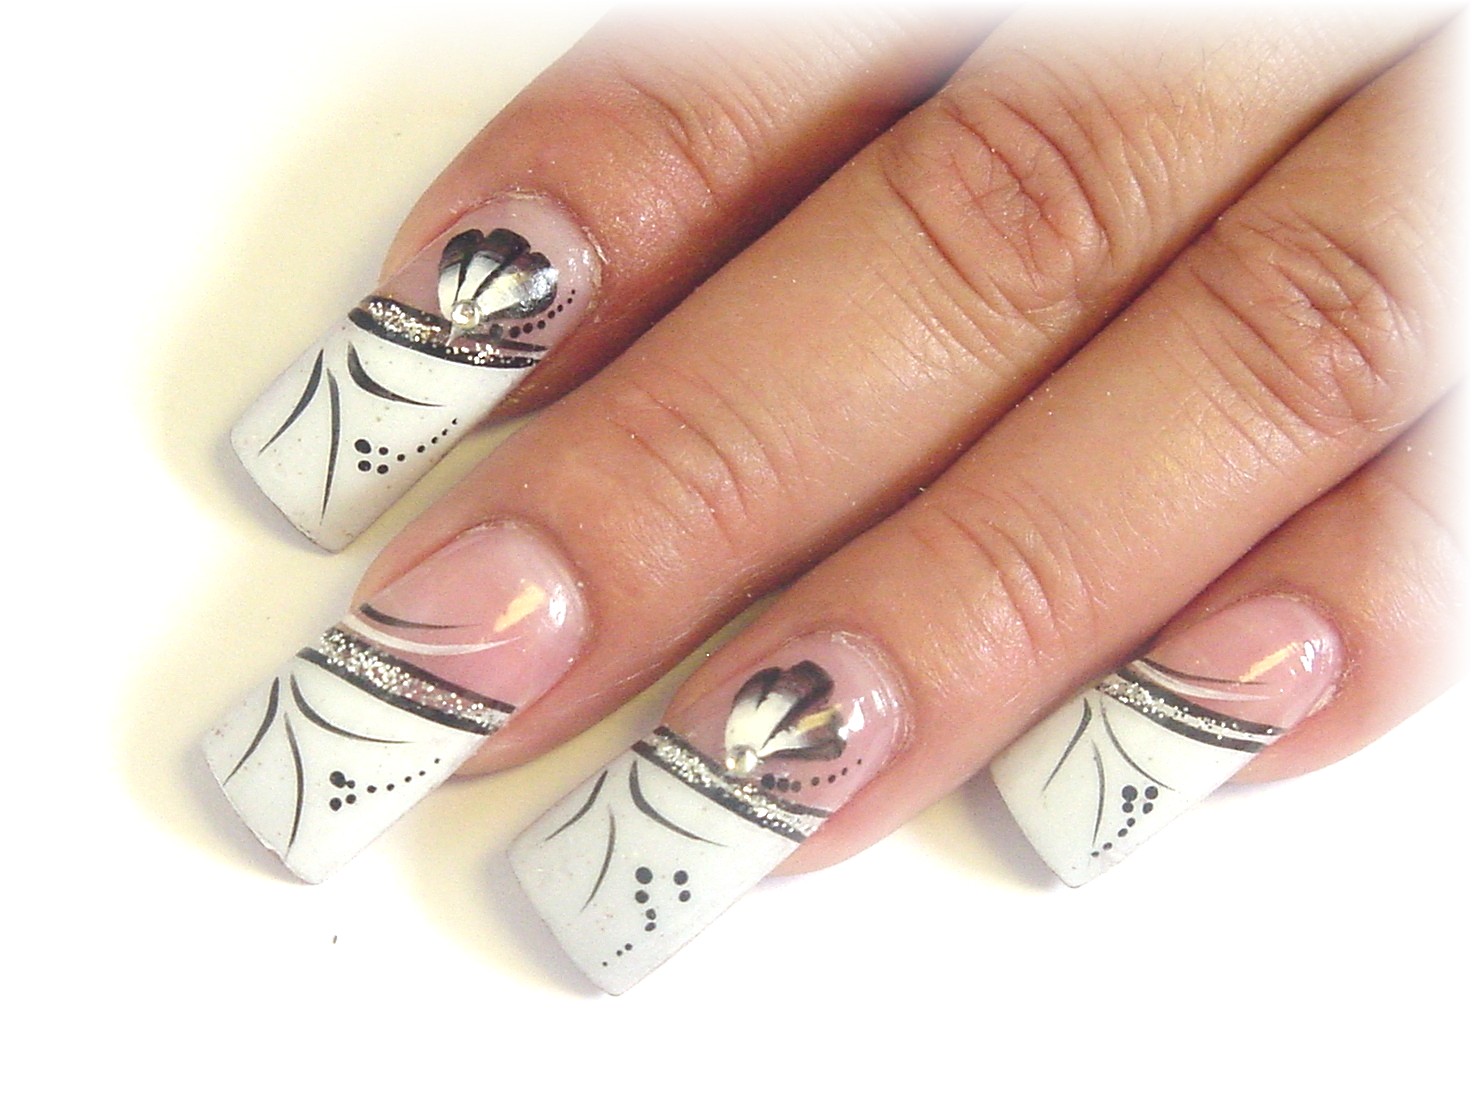 4. Nail Art Gallery - New Designs and Ideas - wide 7